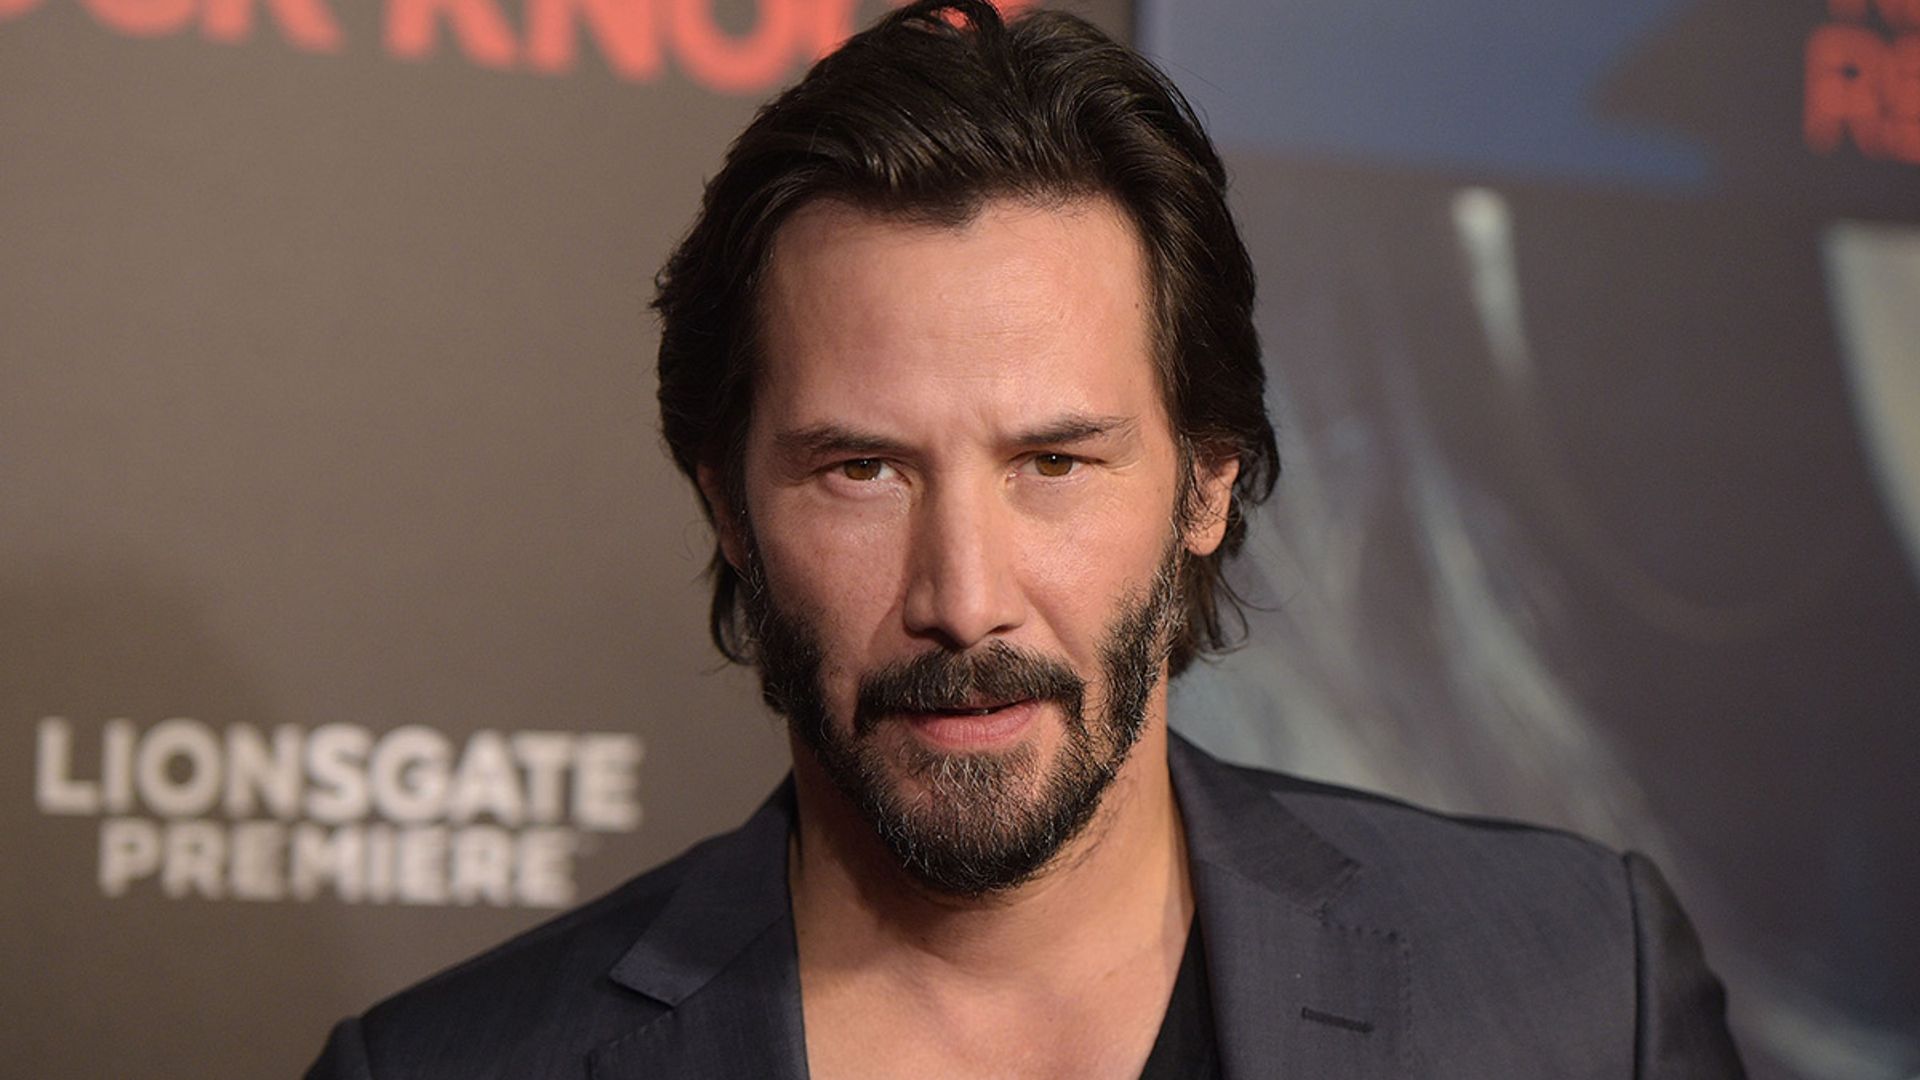 Keanu Reeves Fan Petition Demands He Be Named 2019 Time's Person of the Year